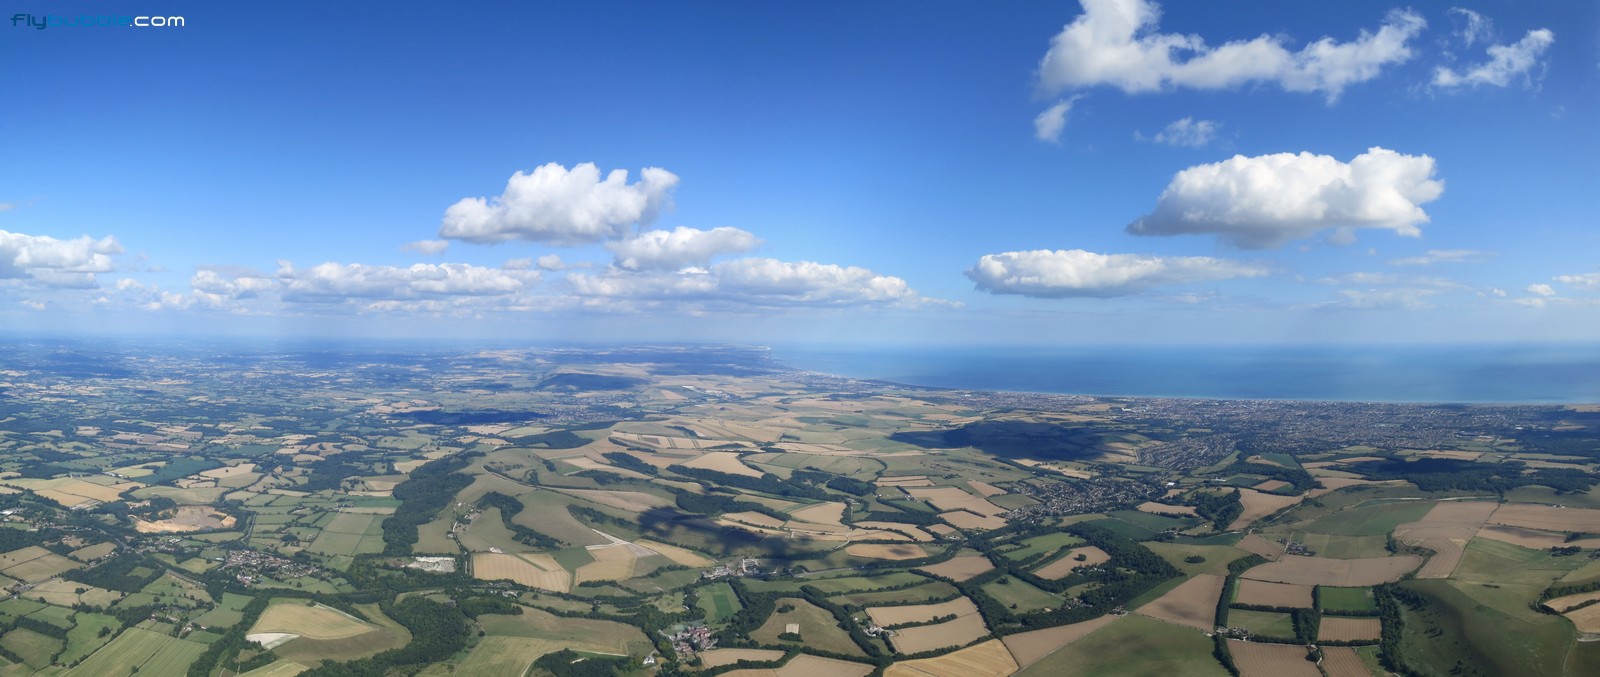 Wonderful aerial view of the Downs